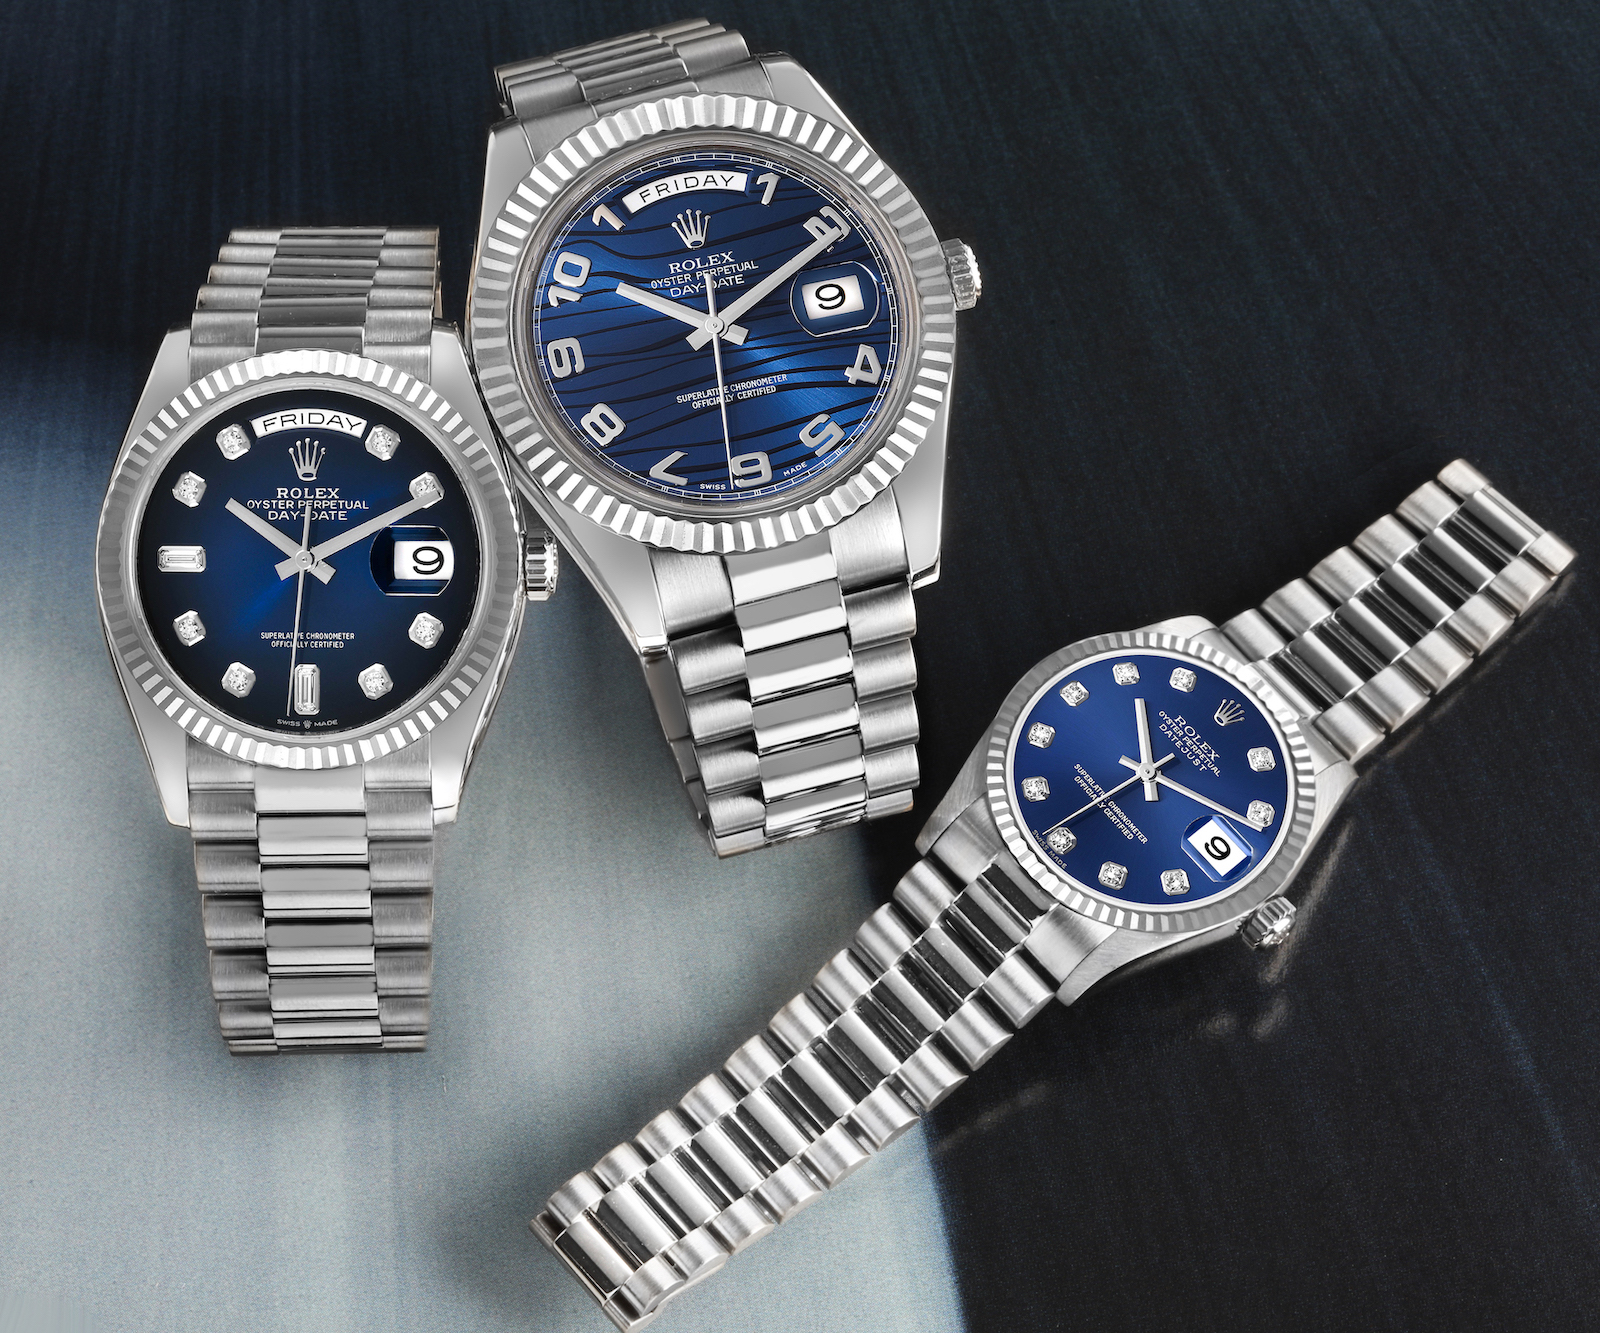 Blue Dial His and Hers Watches_Rolex Day-Date and Rolex Datejust